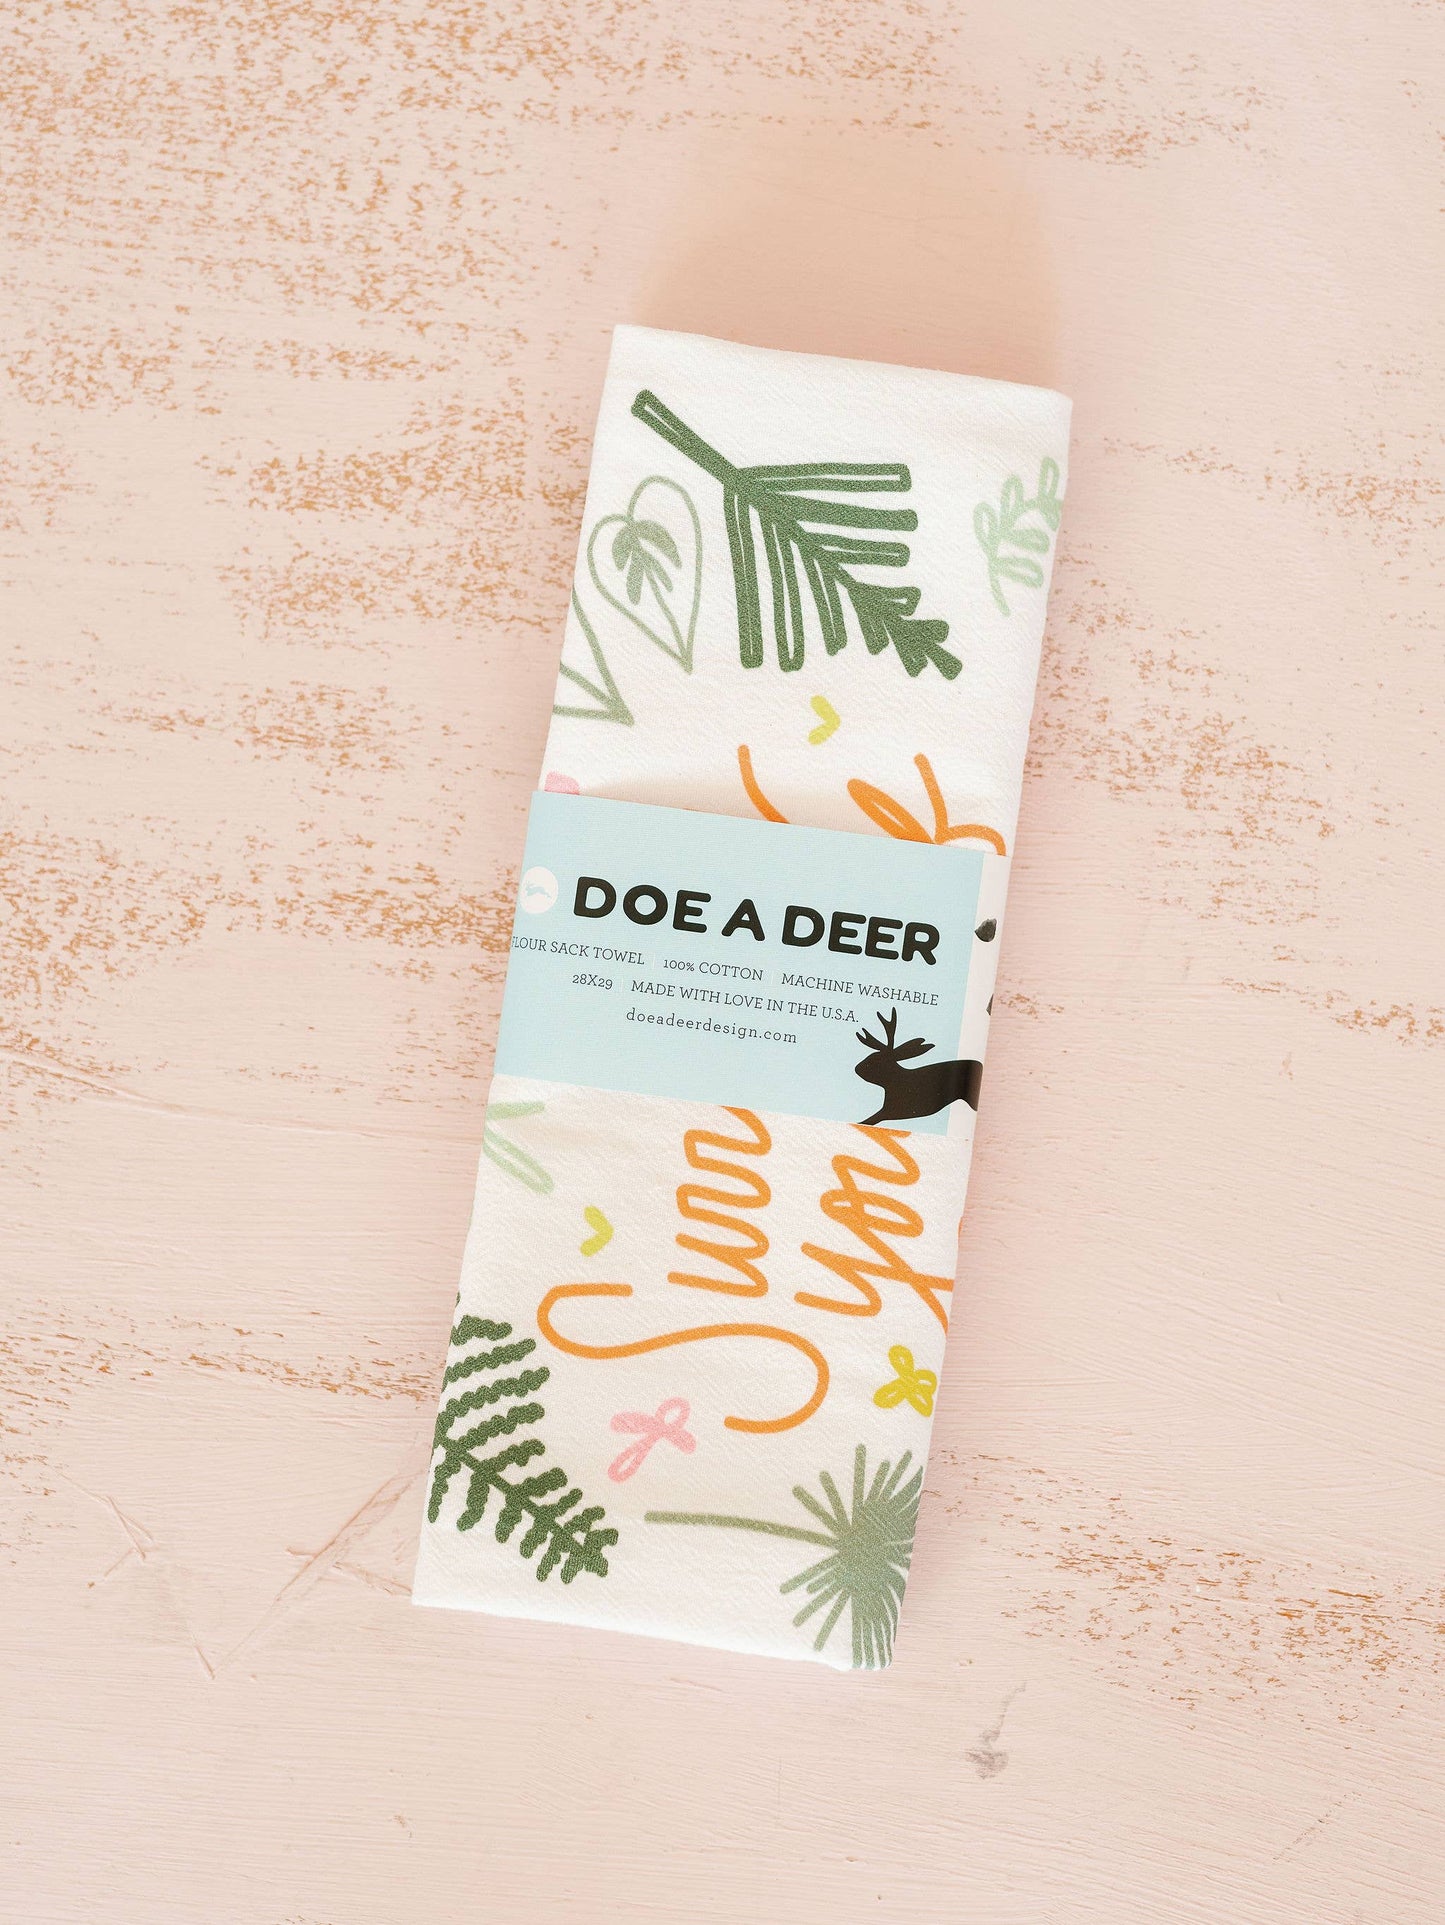 Plant lover's flour sack towel is beautiful and packaged for gifting.